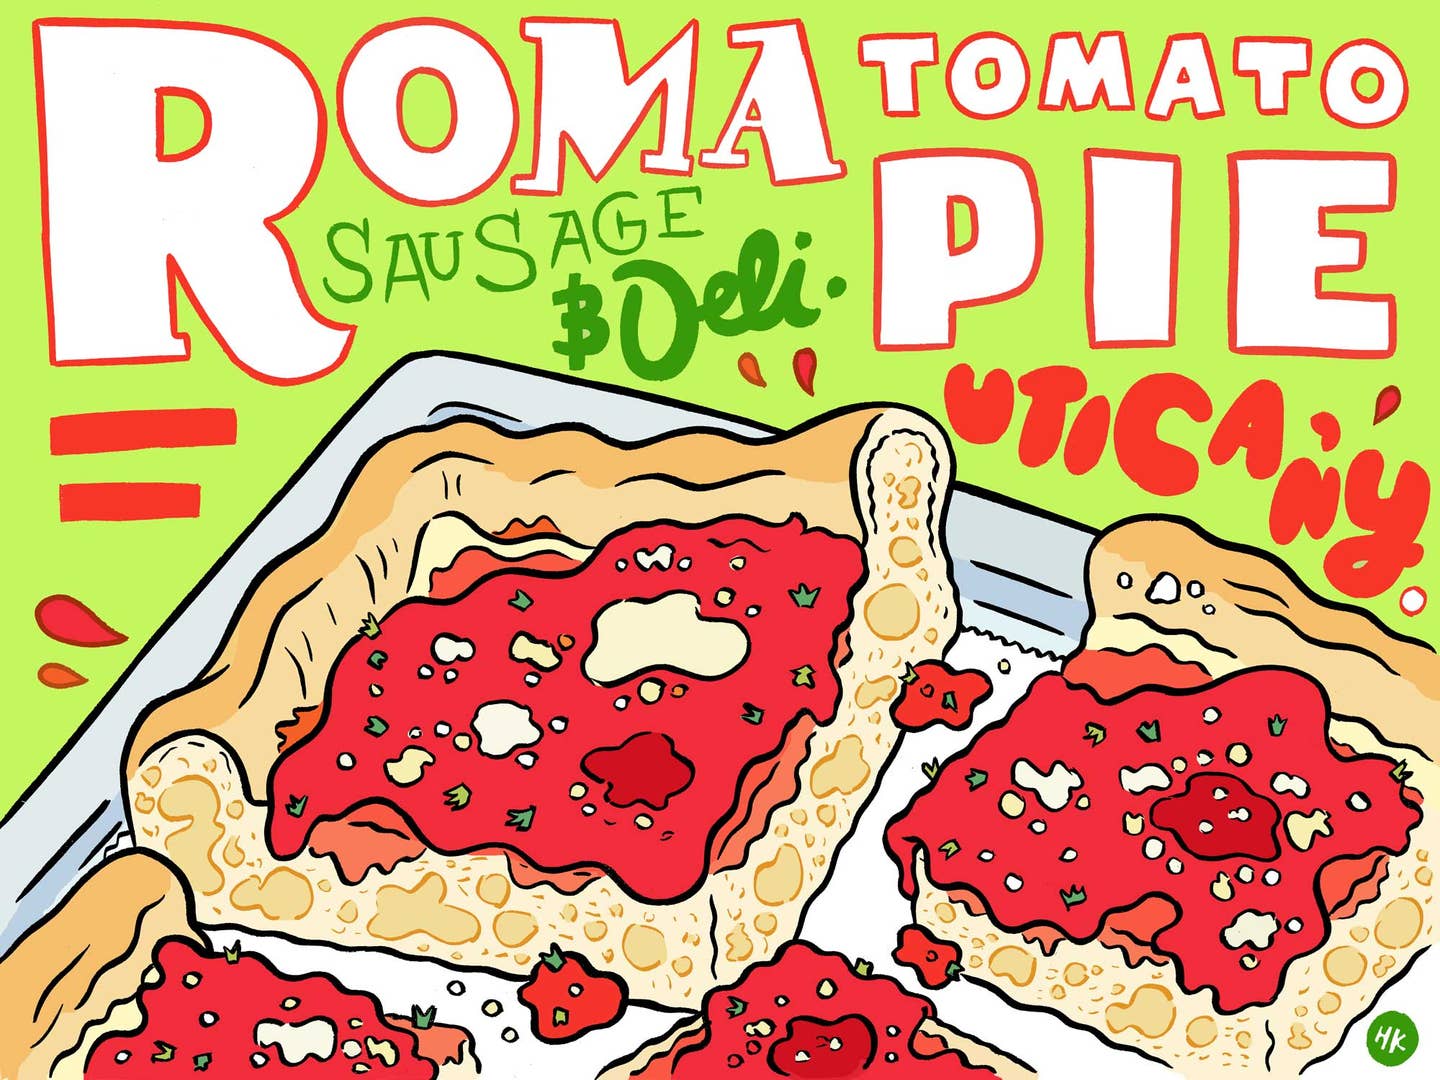 Never Tried Tomato Pie? Then Get Yourself to Utica Right Now